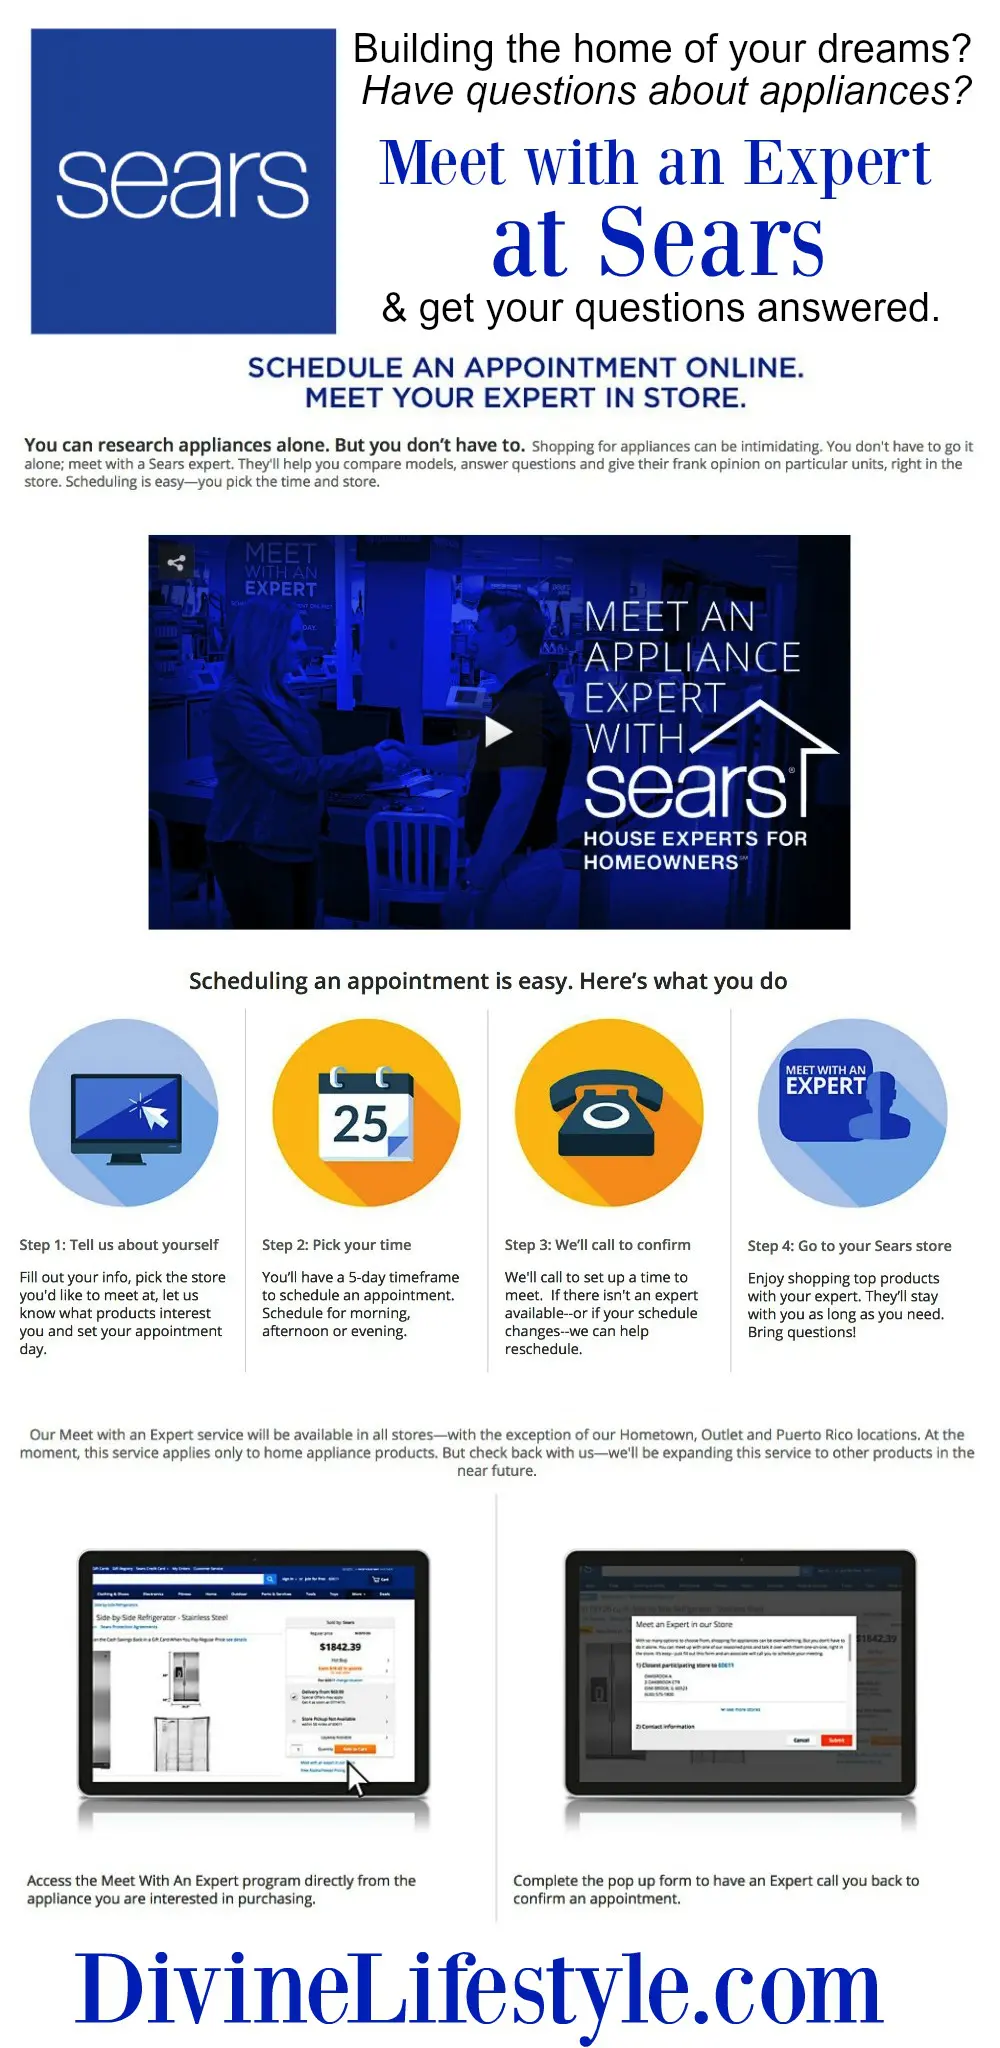 Sears Meet with an Expert for your Dream Home